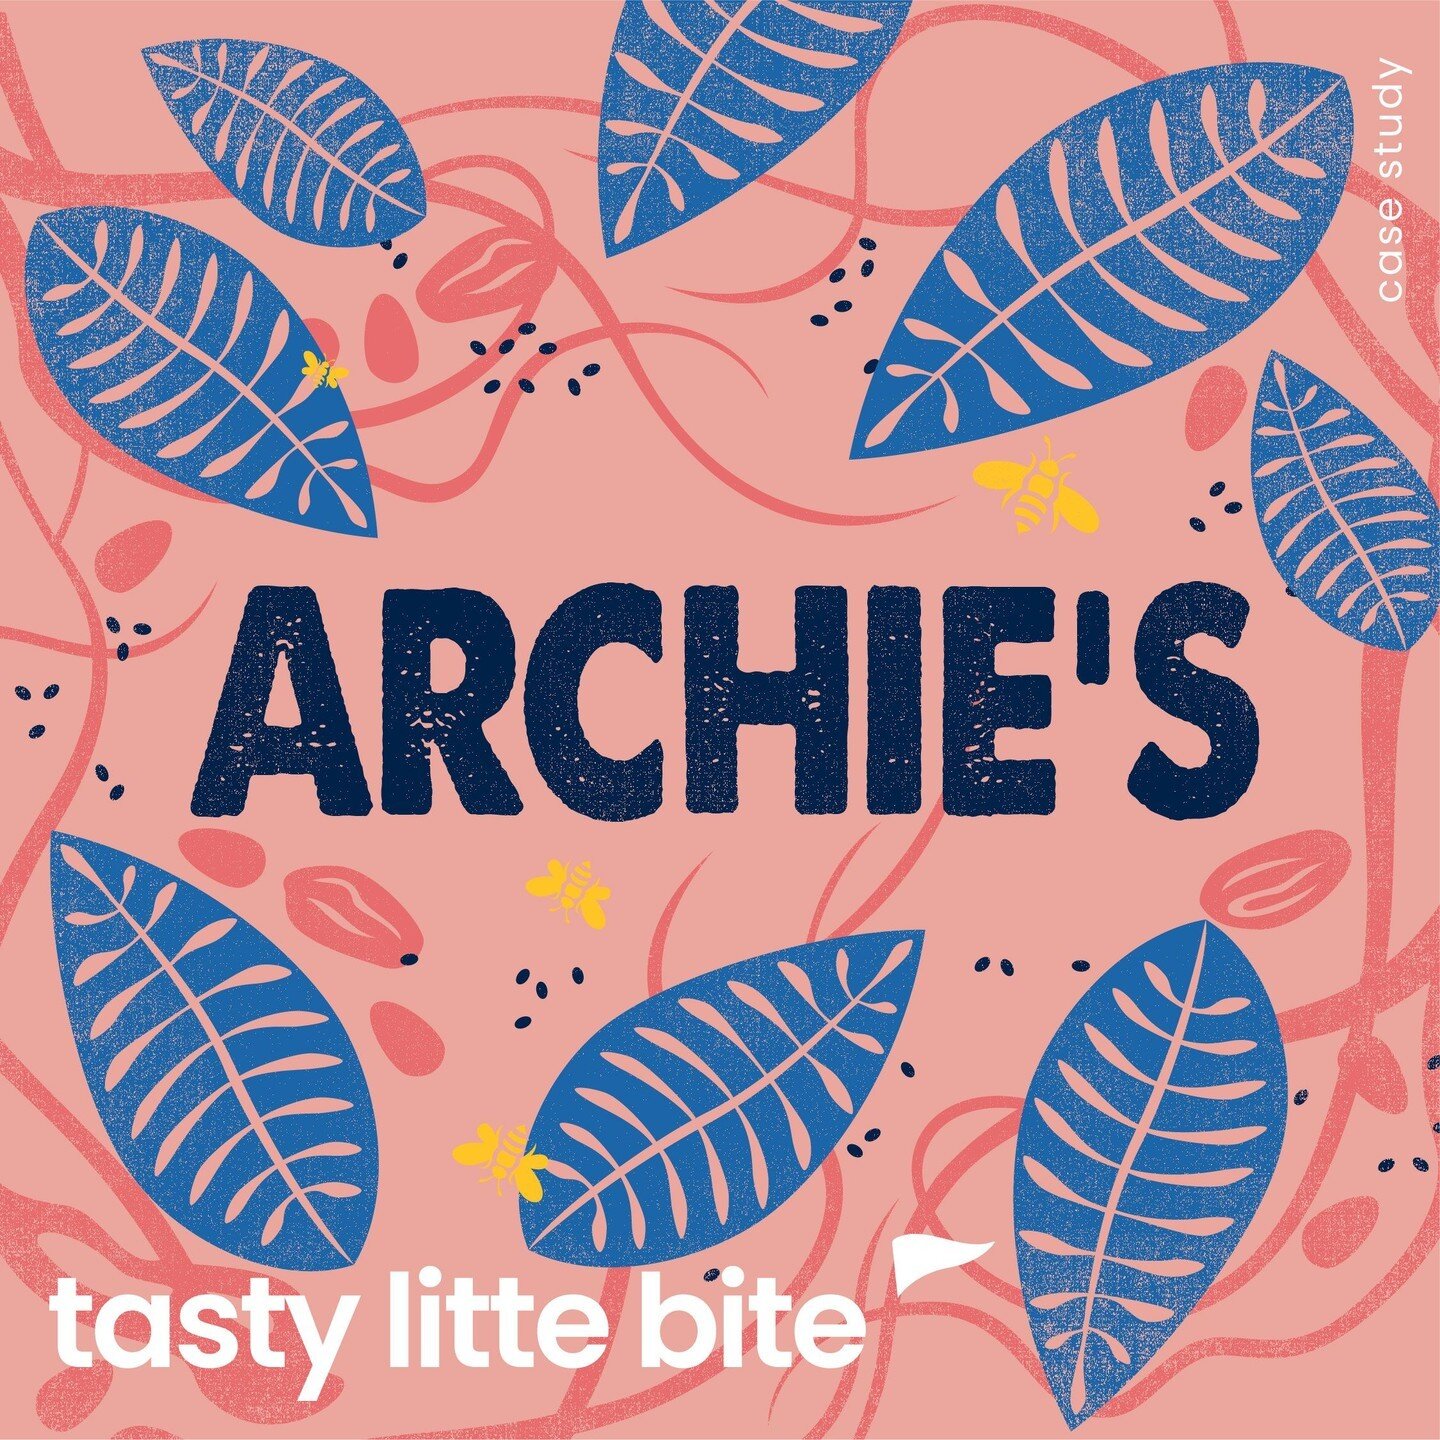 Introducing Archie's Bites, designed exclusively for Oasis as a premier range of healthy snacks. We've brought the ingredient story to life through a modern color palette and a fresh illustrative style. Find these perfect healthy treats at IGA stores